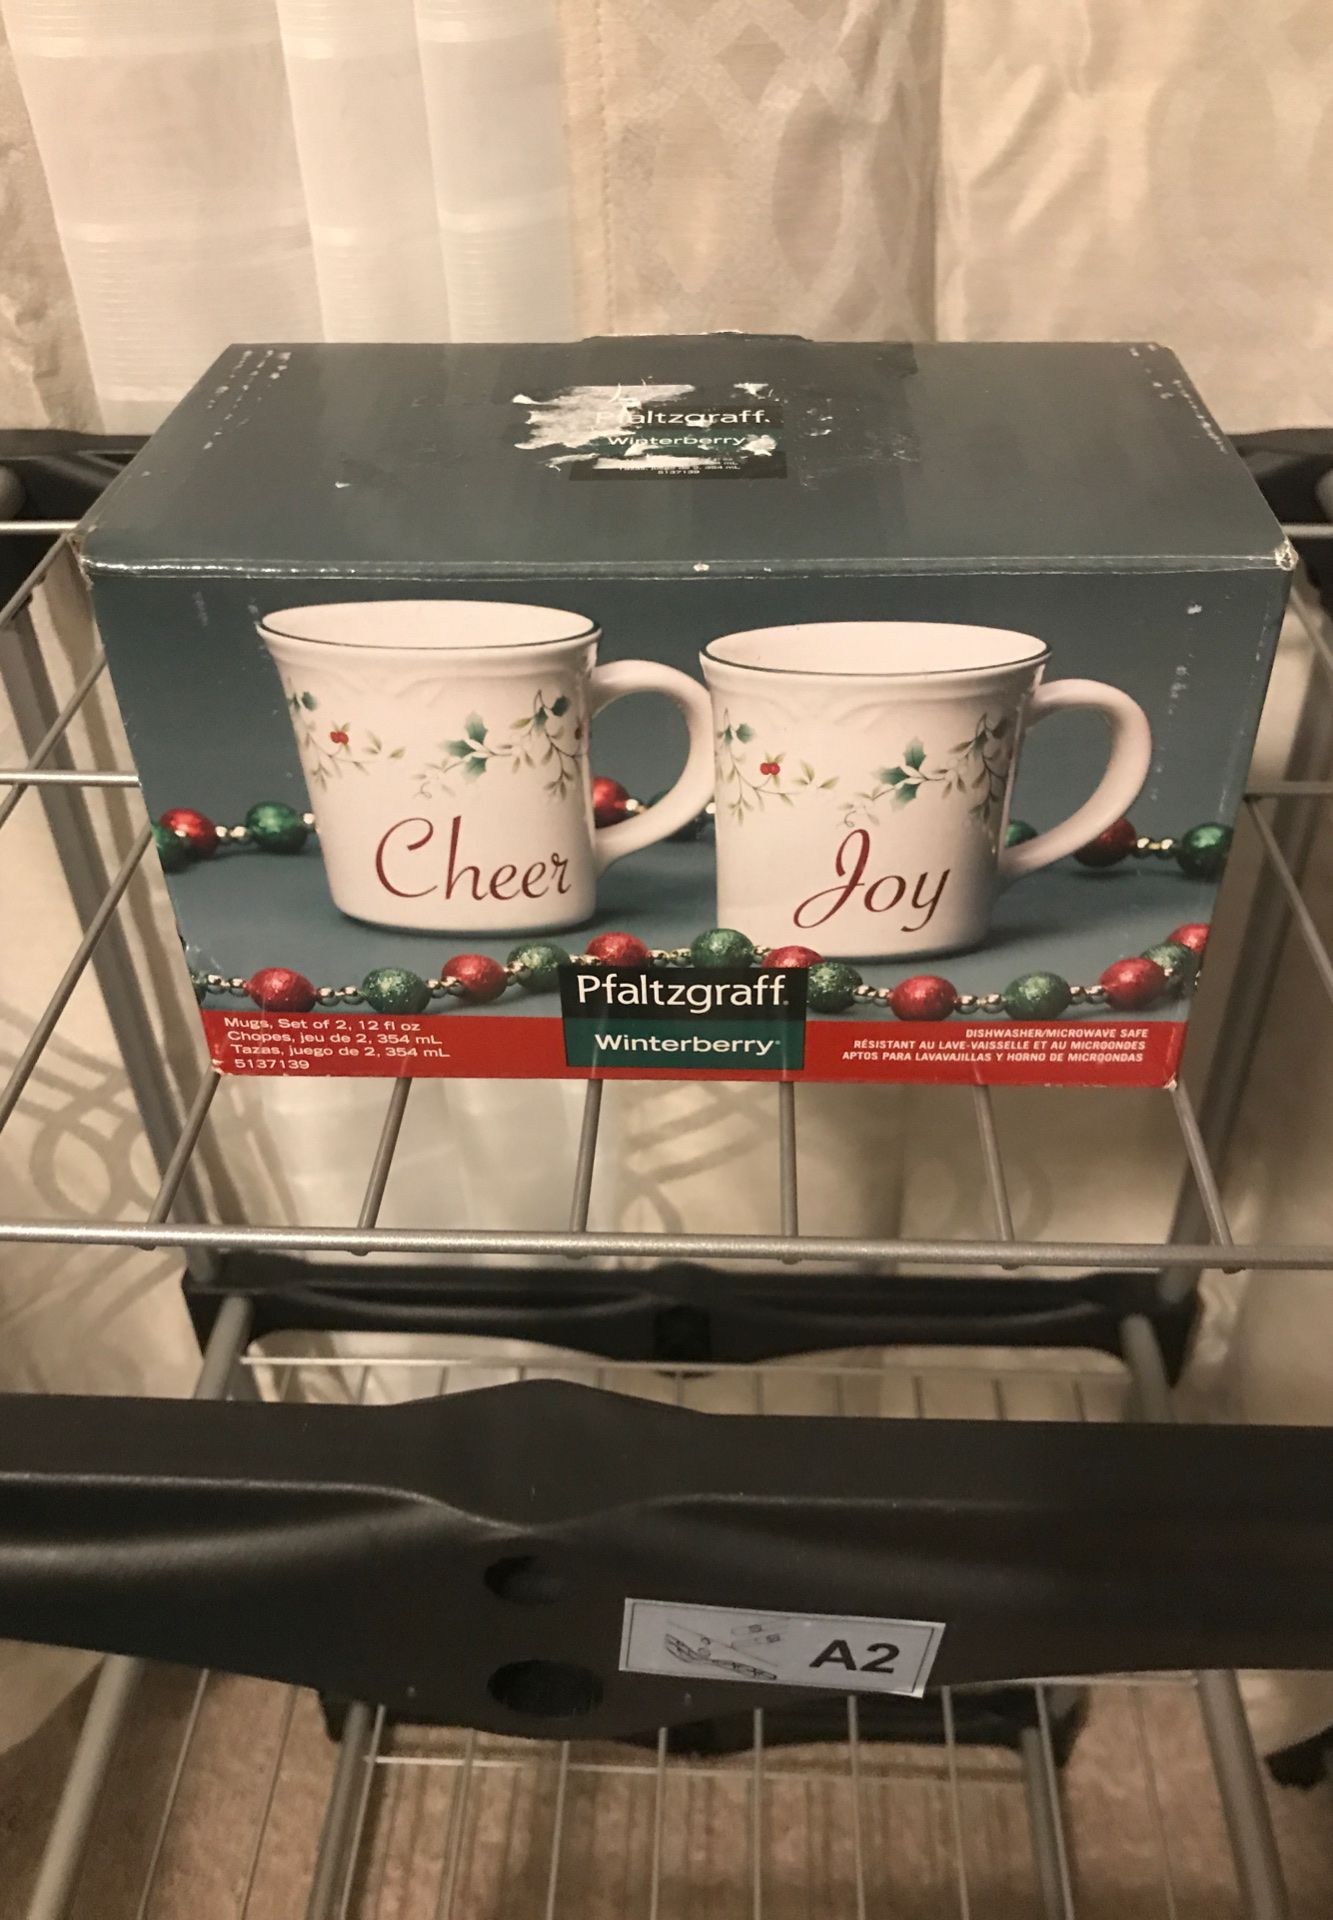 Pfaltzgraff mugs set of two brand new in box never been opened